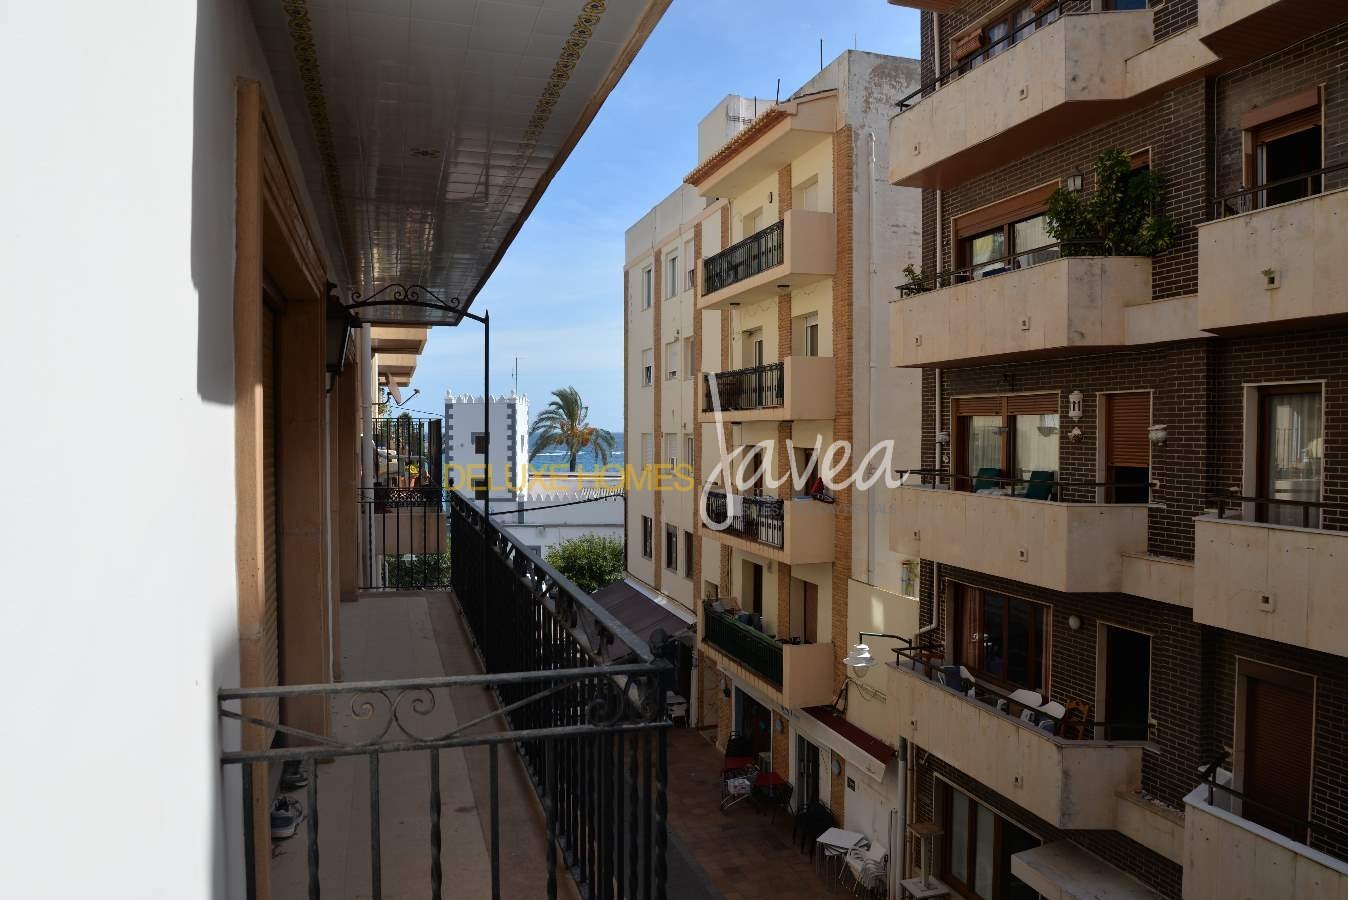 3 Bedroom 2 bathroom apartment in the heart of the Port, Jávea